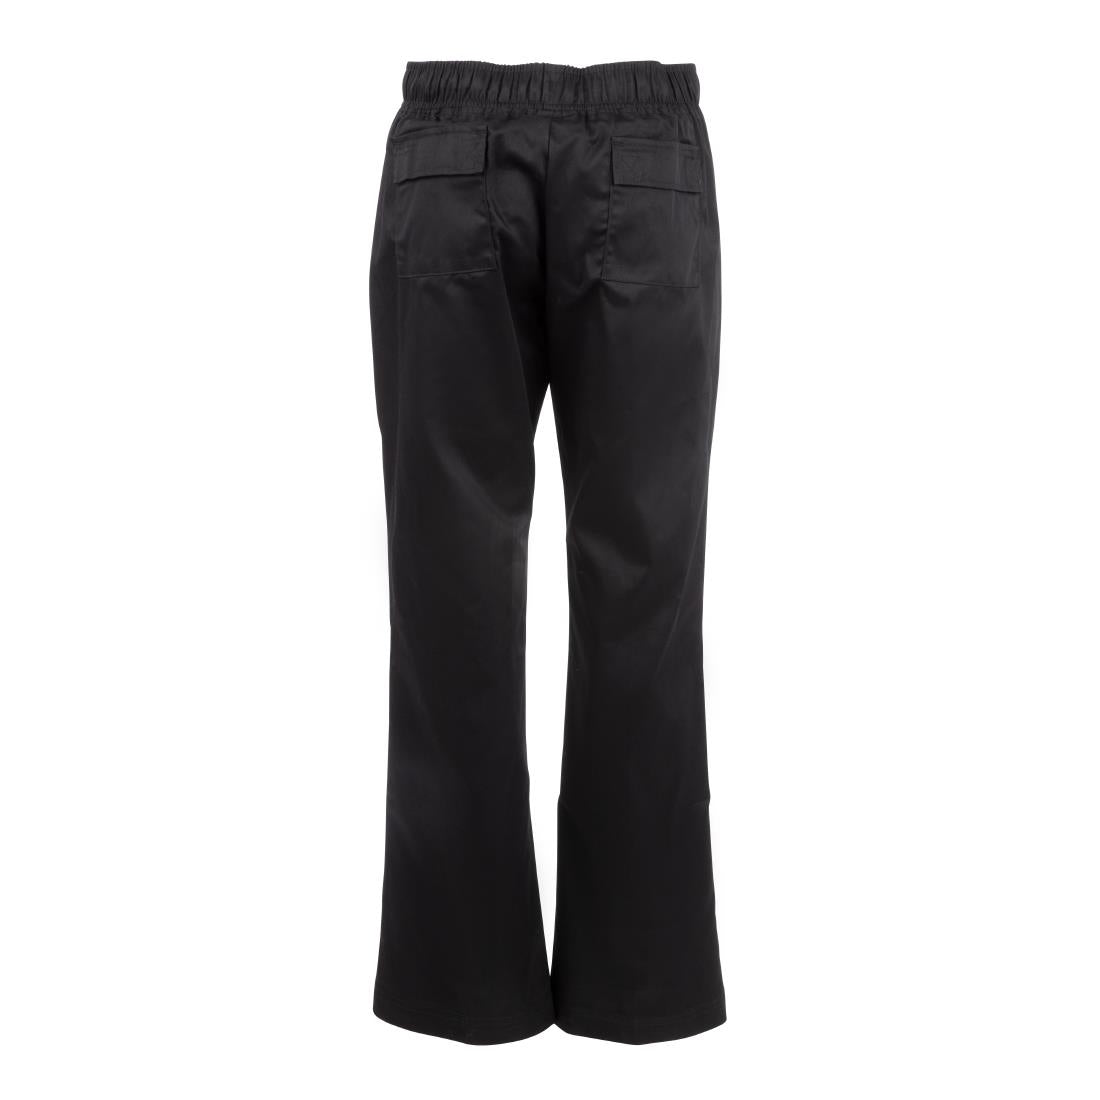 A431-L Chef Works Womens Executive Chef Trousers Black L